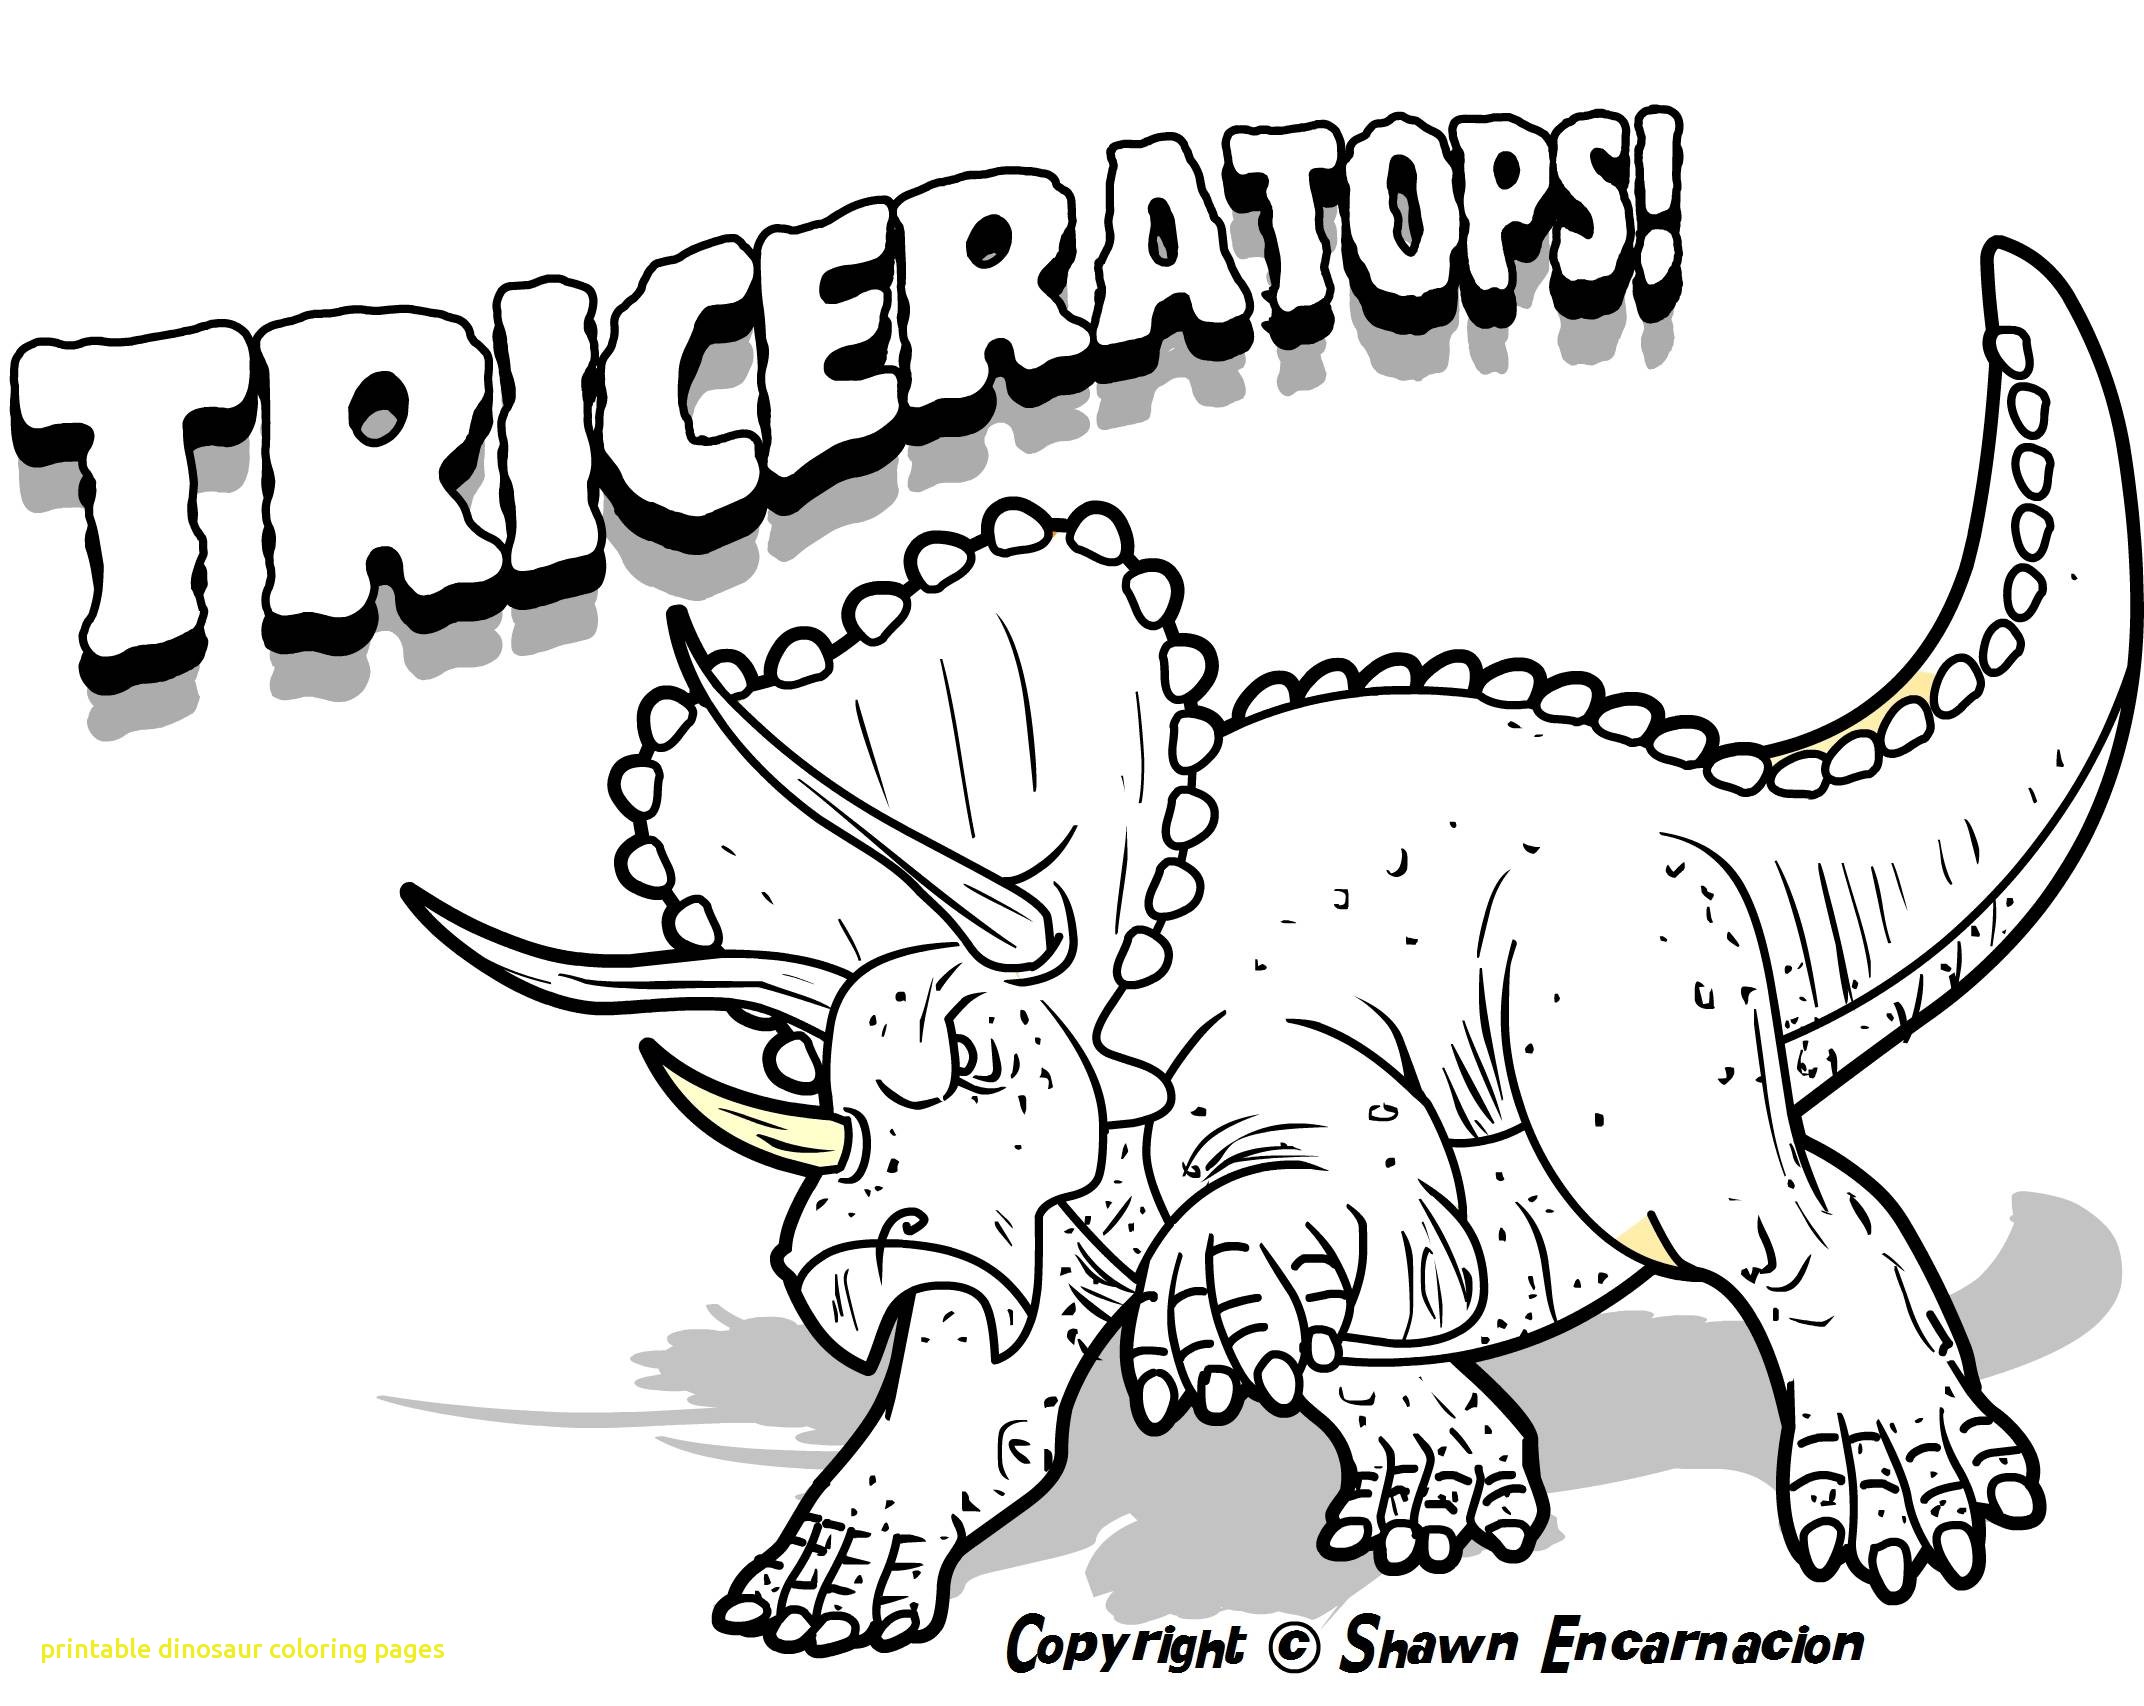 Extinct Animals Coloring Pages at GetColorings.com | Free printable